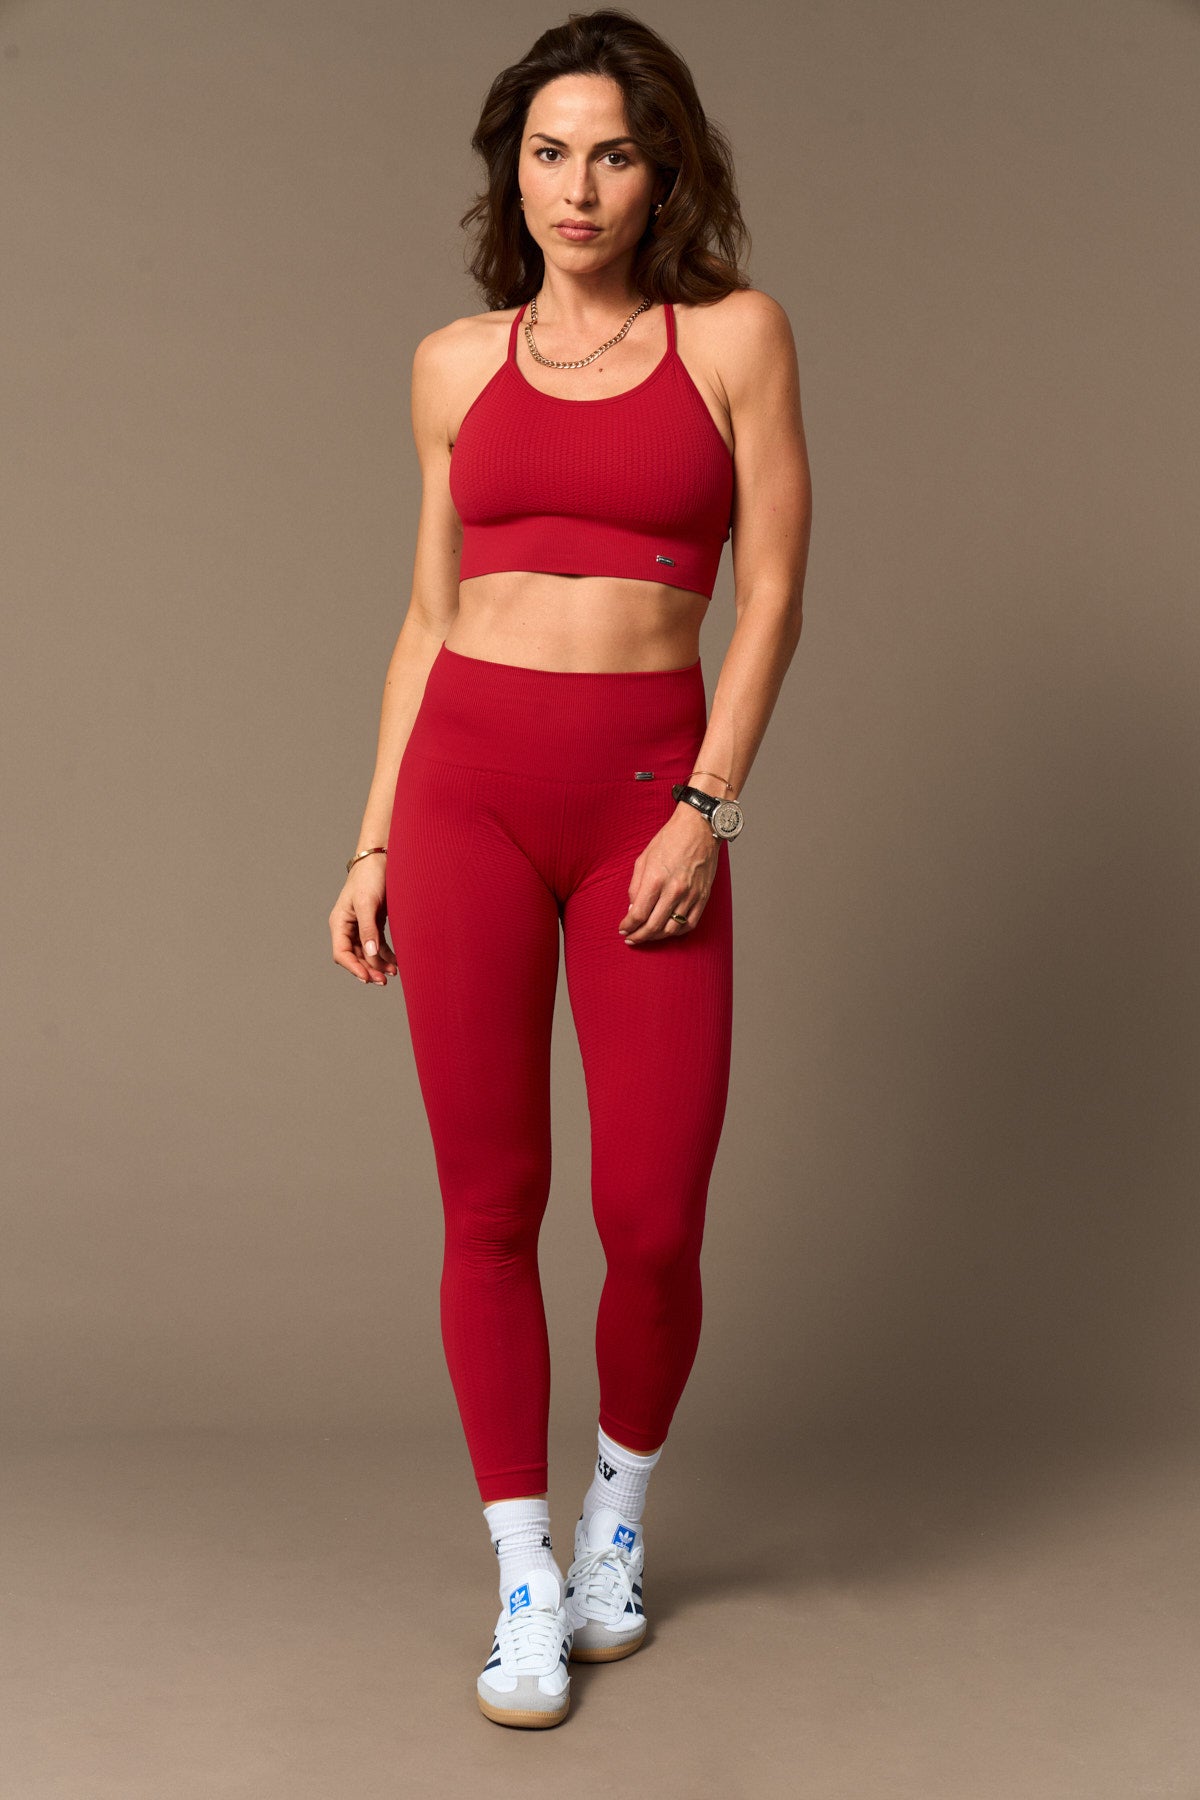 Flow Legging Red-Long Leggings-Store Clothing Sustainable Recycled Yoga Leggings Women On-line Barcelona Believe Athletics Sustainable Recycled Yoga Clothes